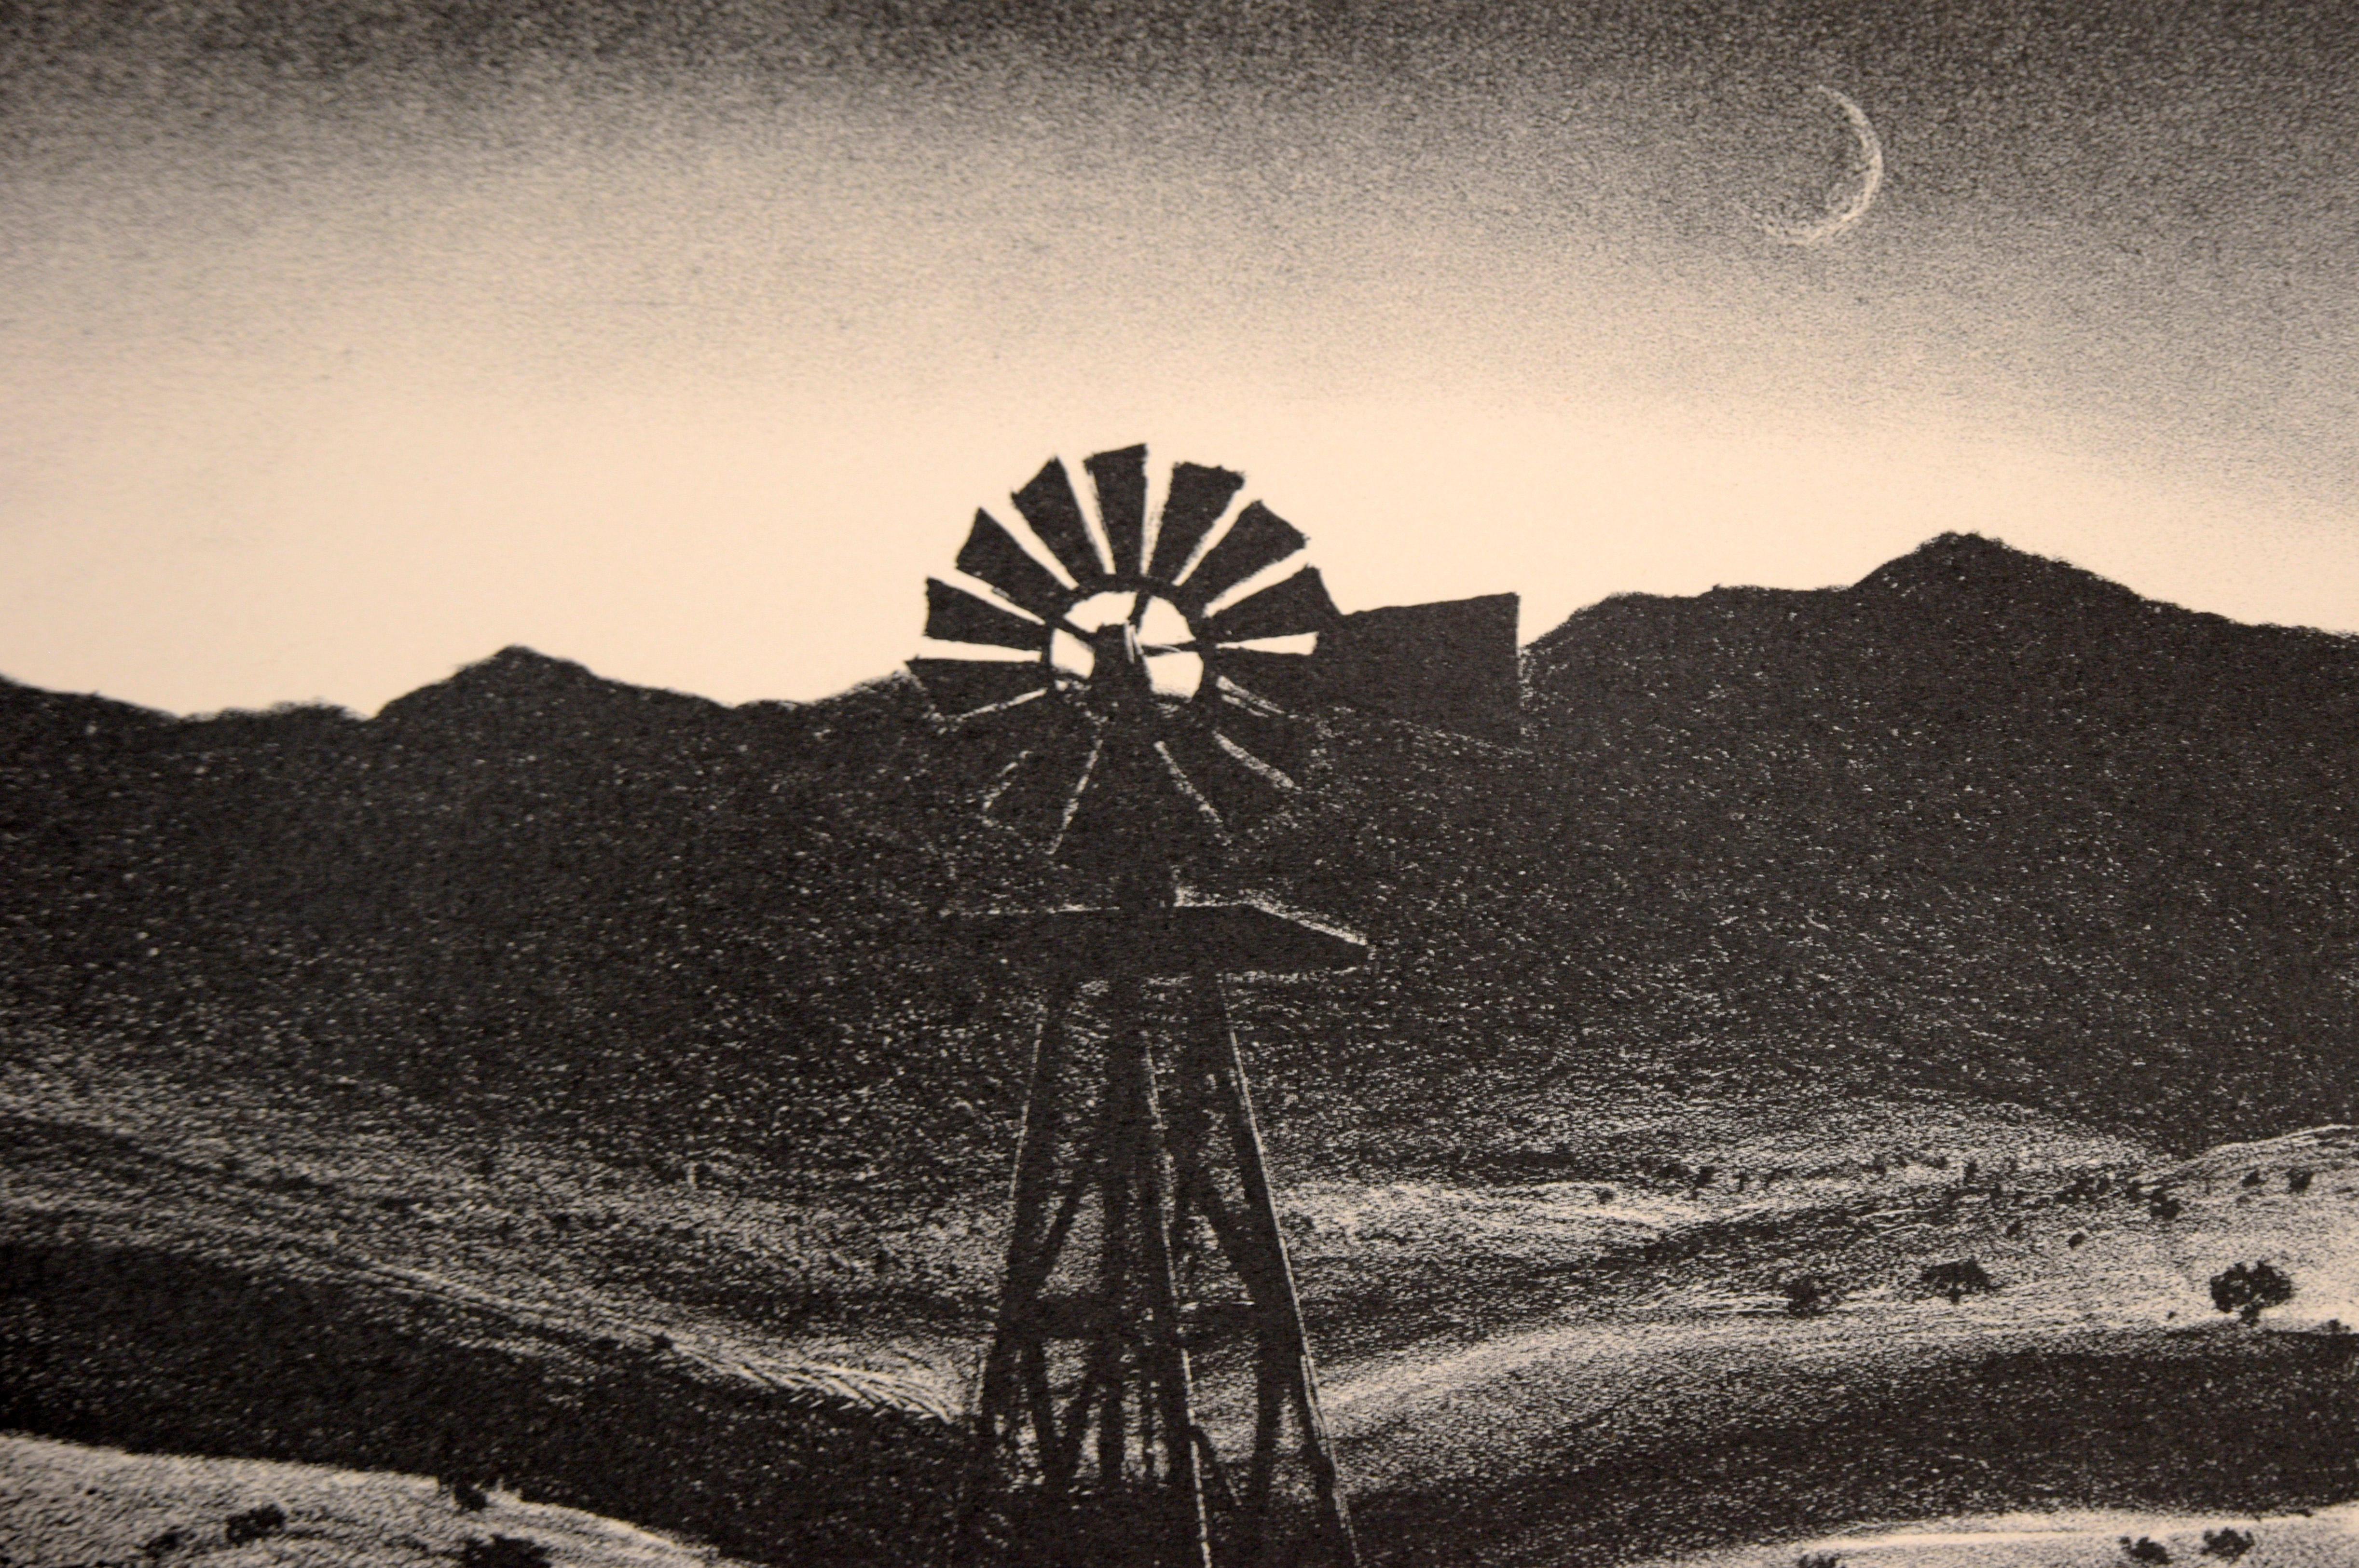 Windmill And Well At Dusk - Original Vintage Lithograph - American Impressionist Print by Peter Hurd